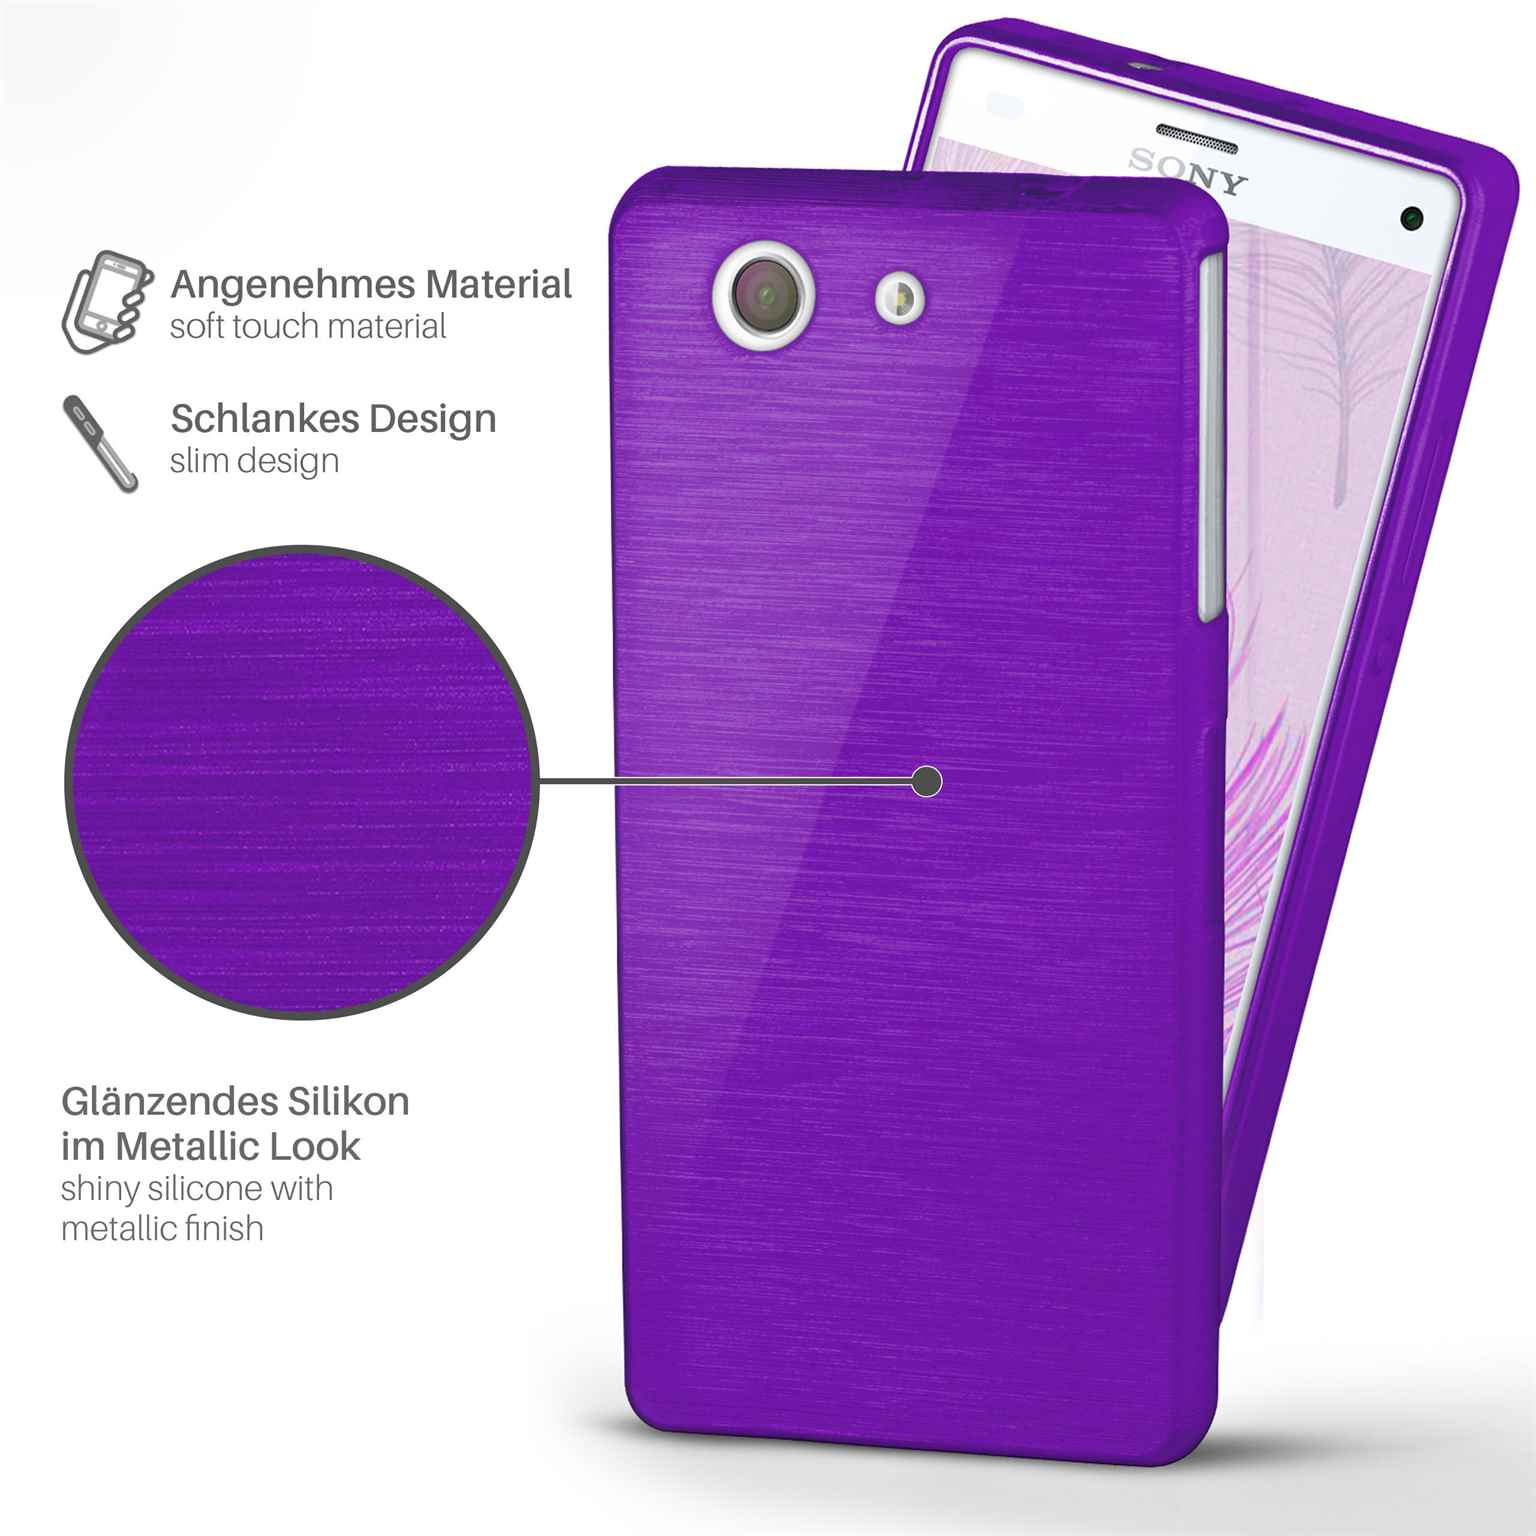 Compact, Z3 Xperia MOEX Brushed Purpure-Purple Sony, Backcover, Case,